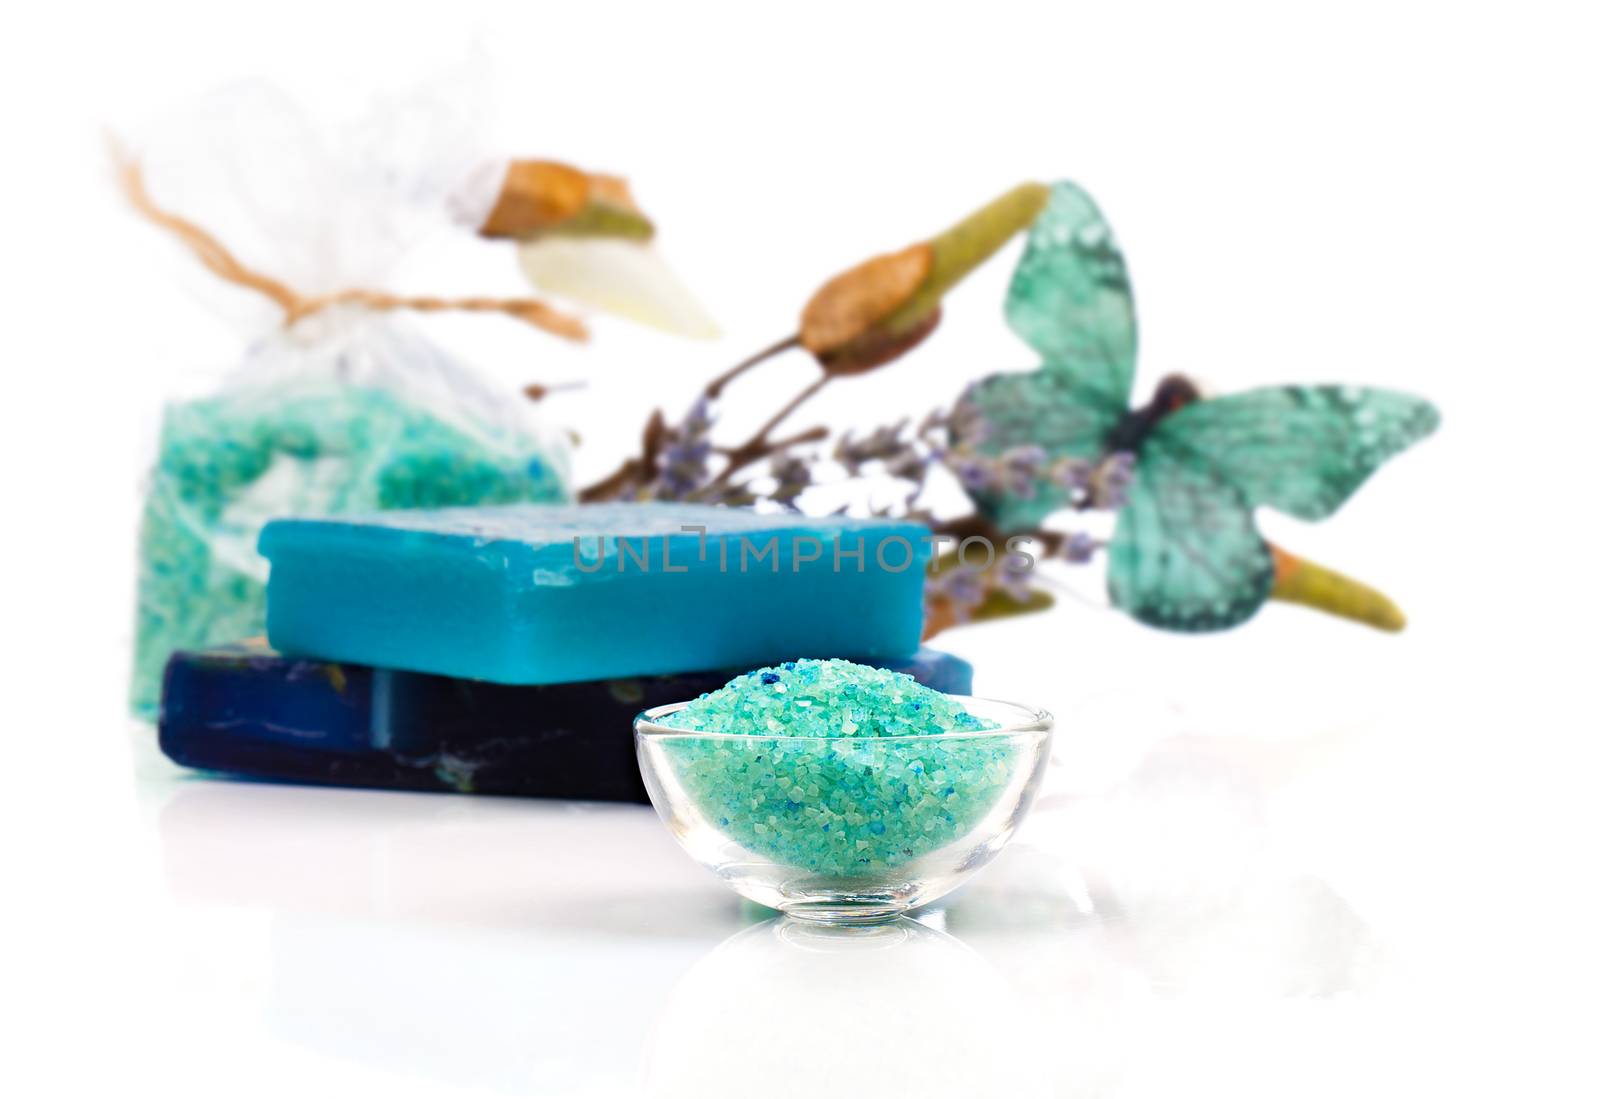 Spa treatment with turquoise bath salts, on white background by motorolka